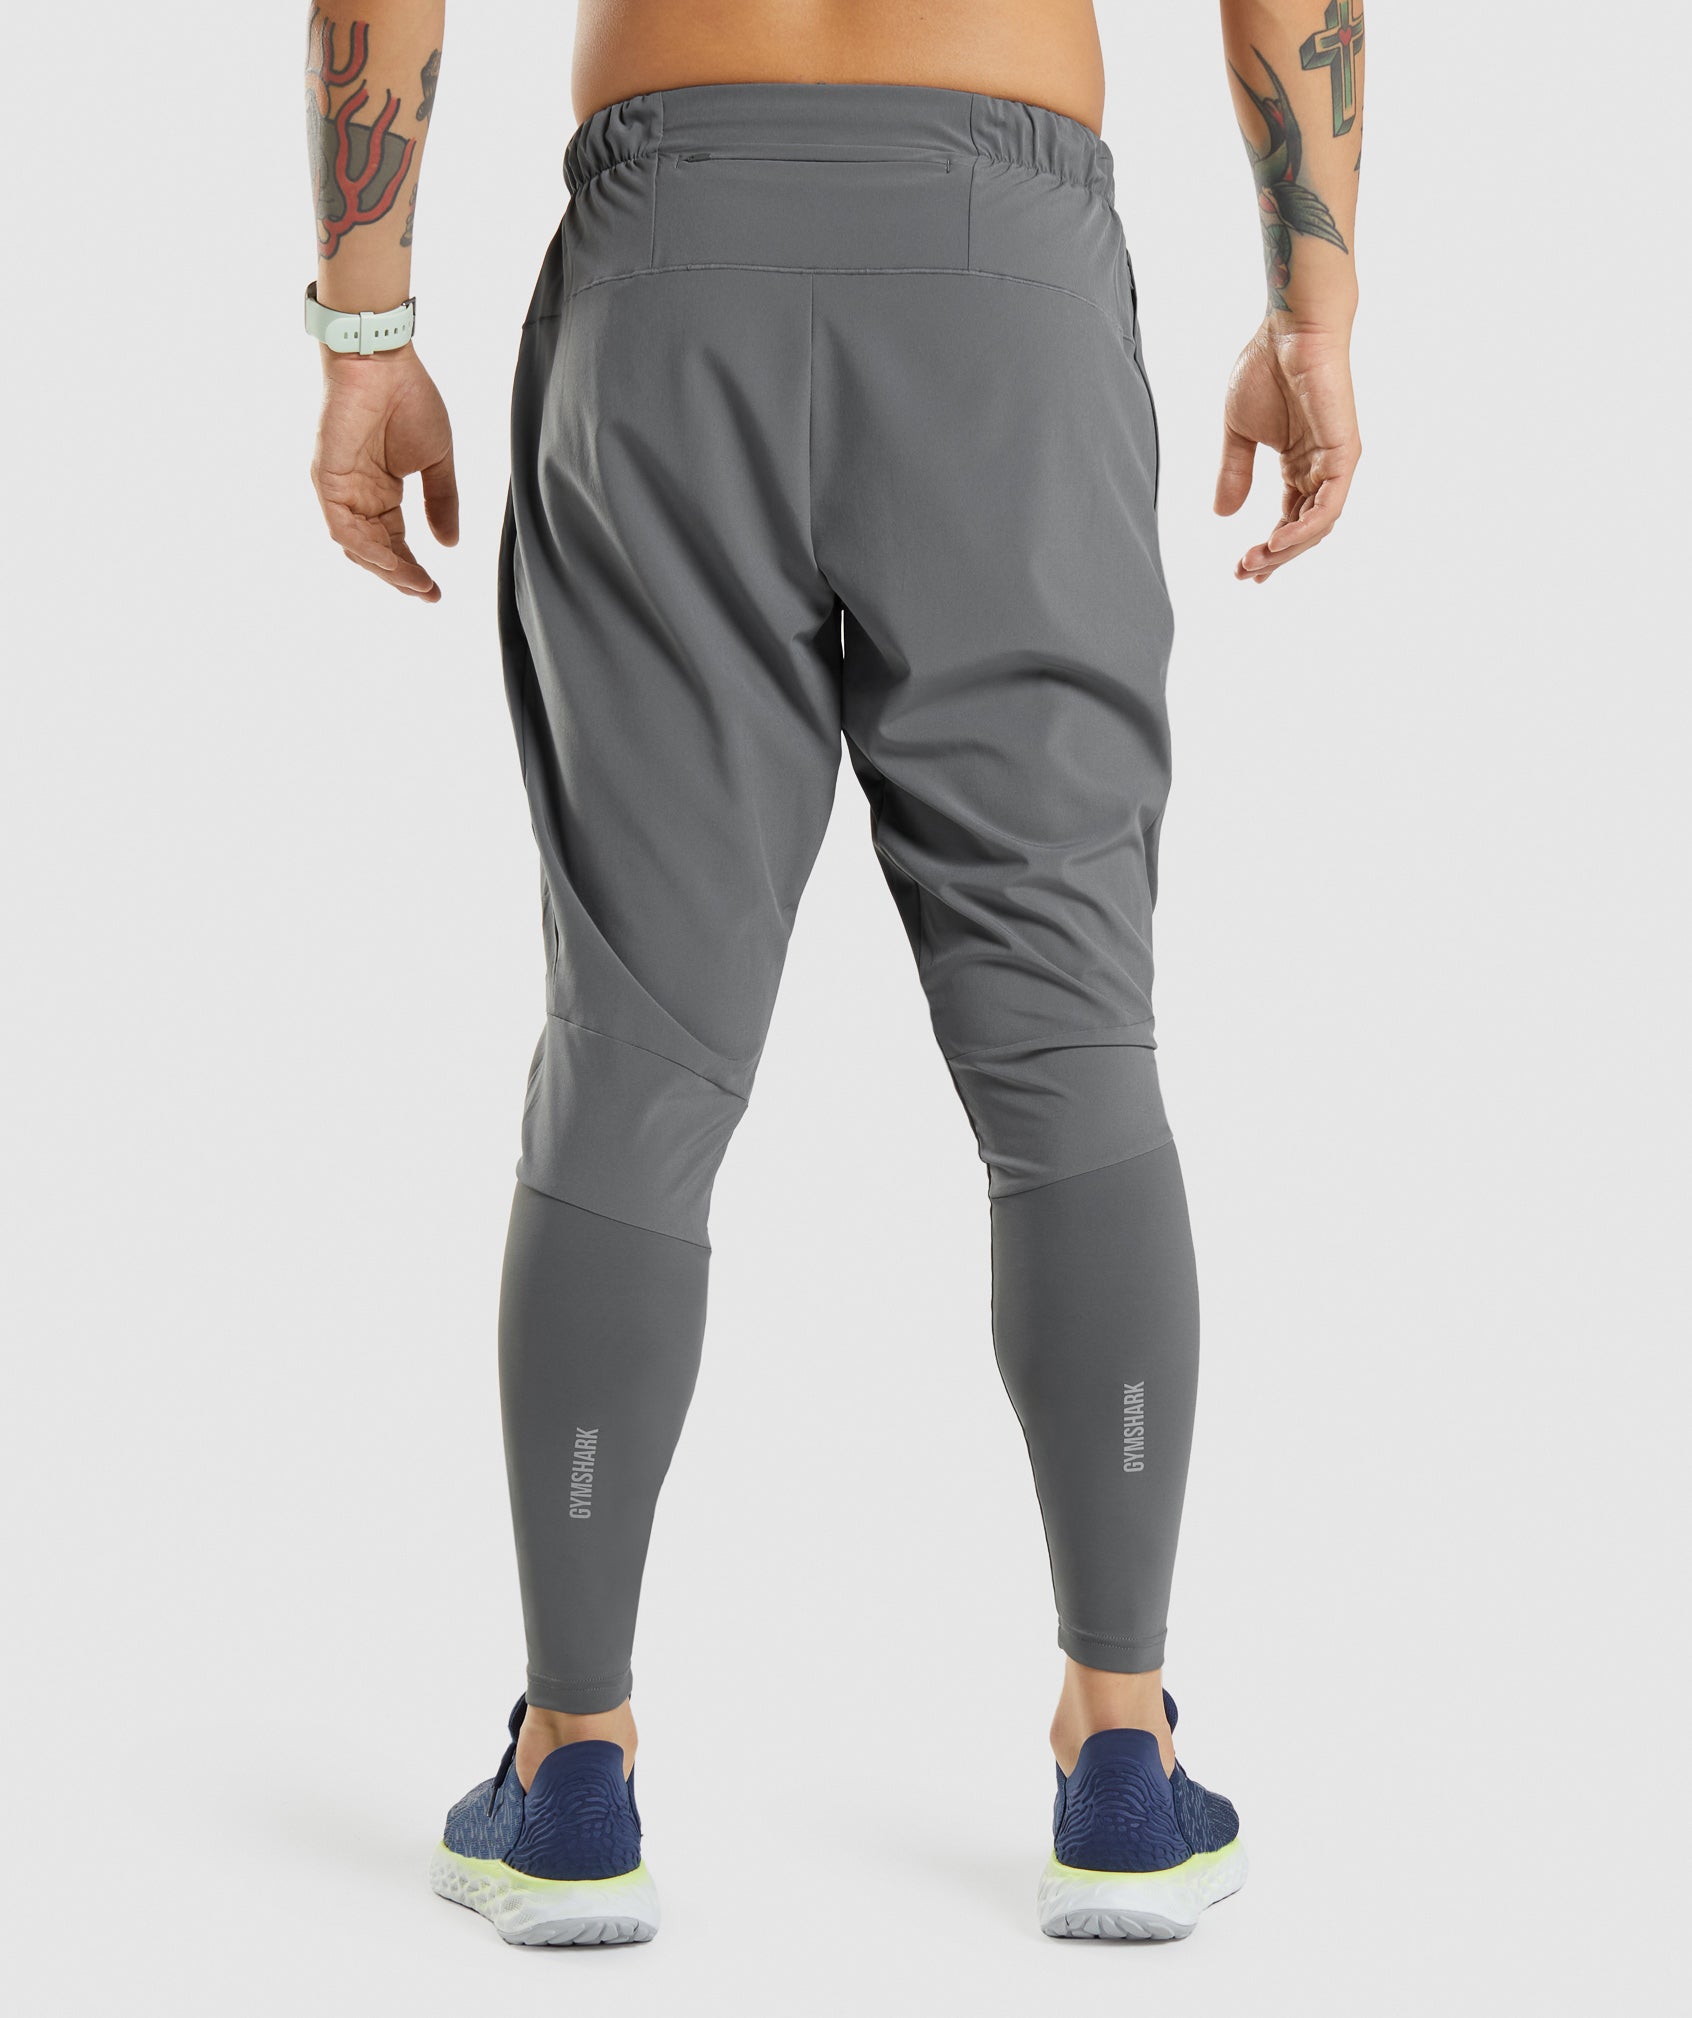 Speed Joggers in Charcoal - view 3